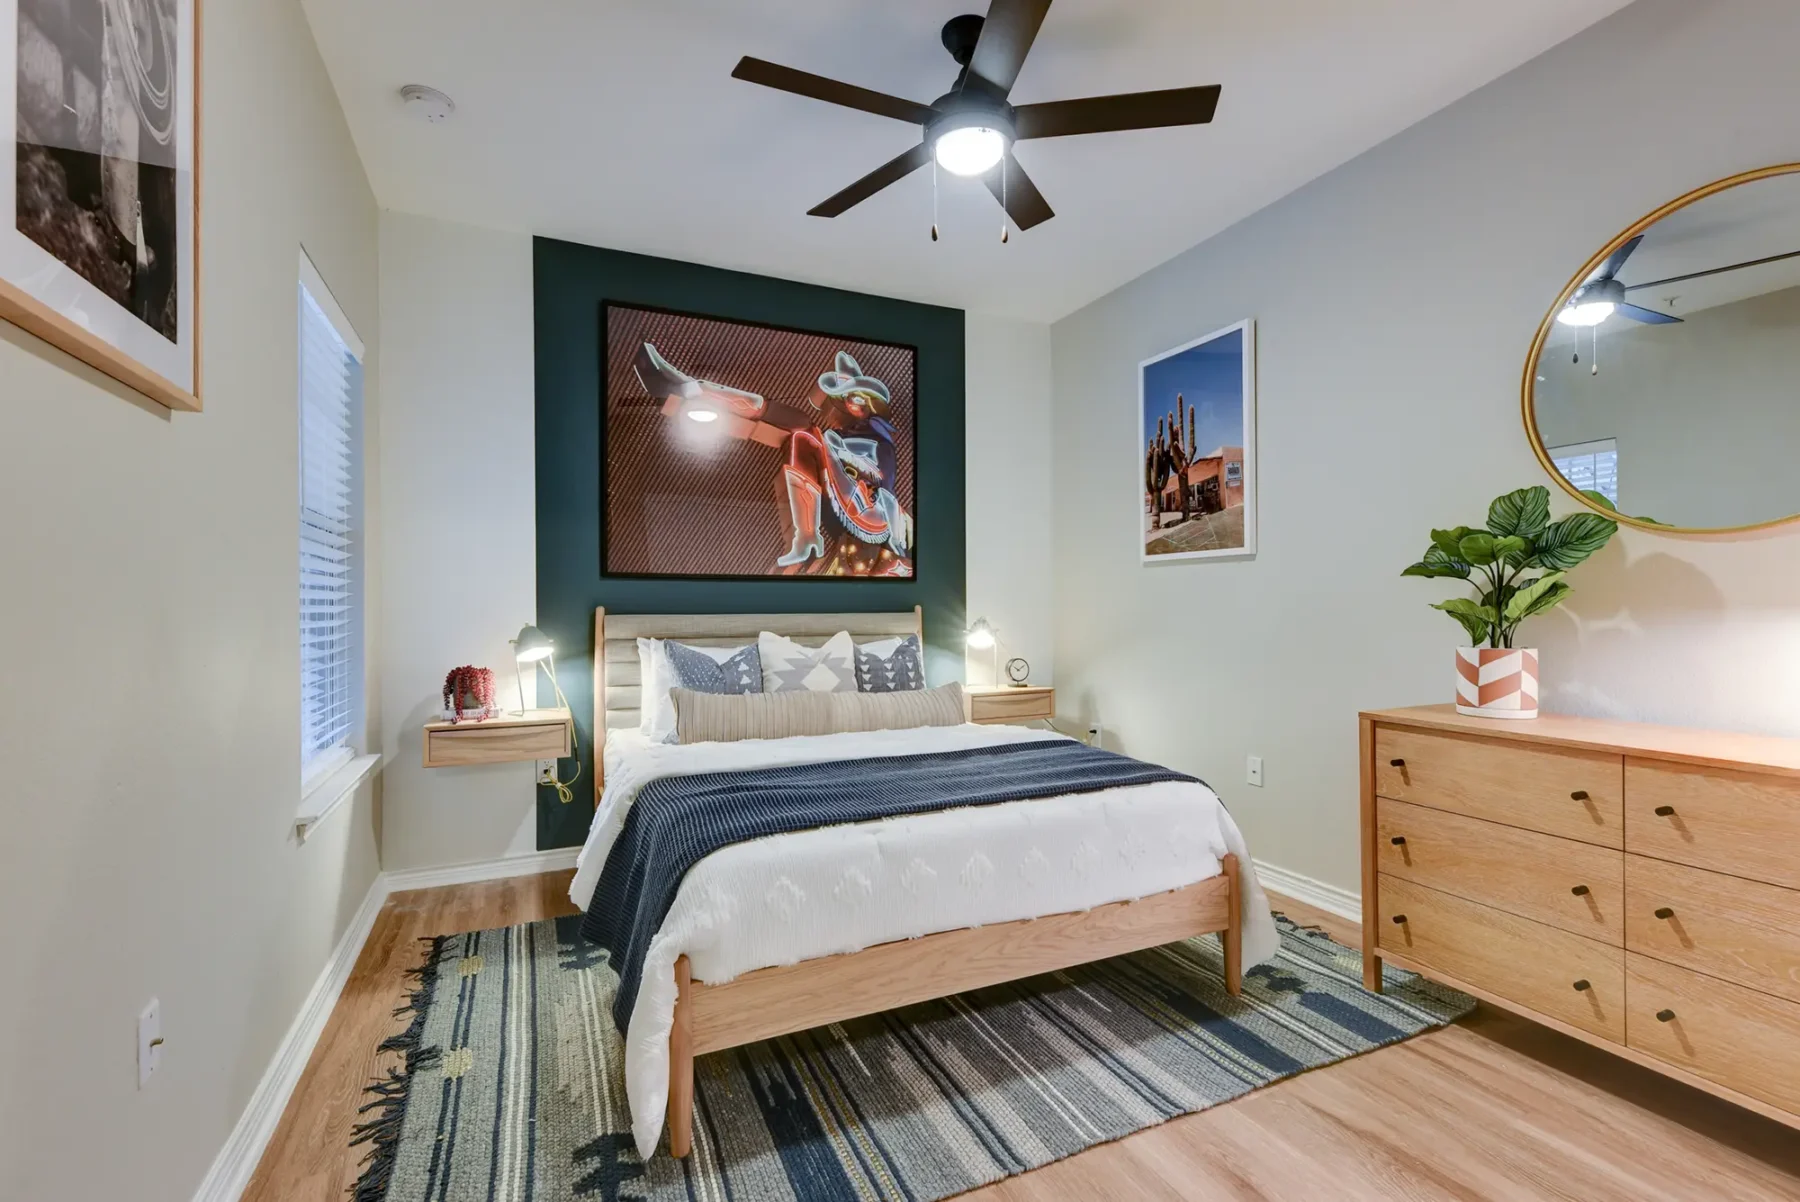 Bedroom with wood-style flooring, window, and ceiling fan